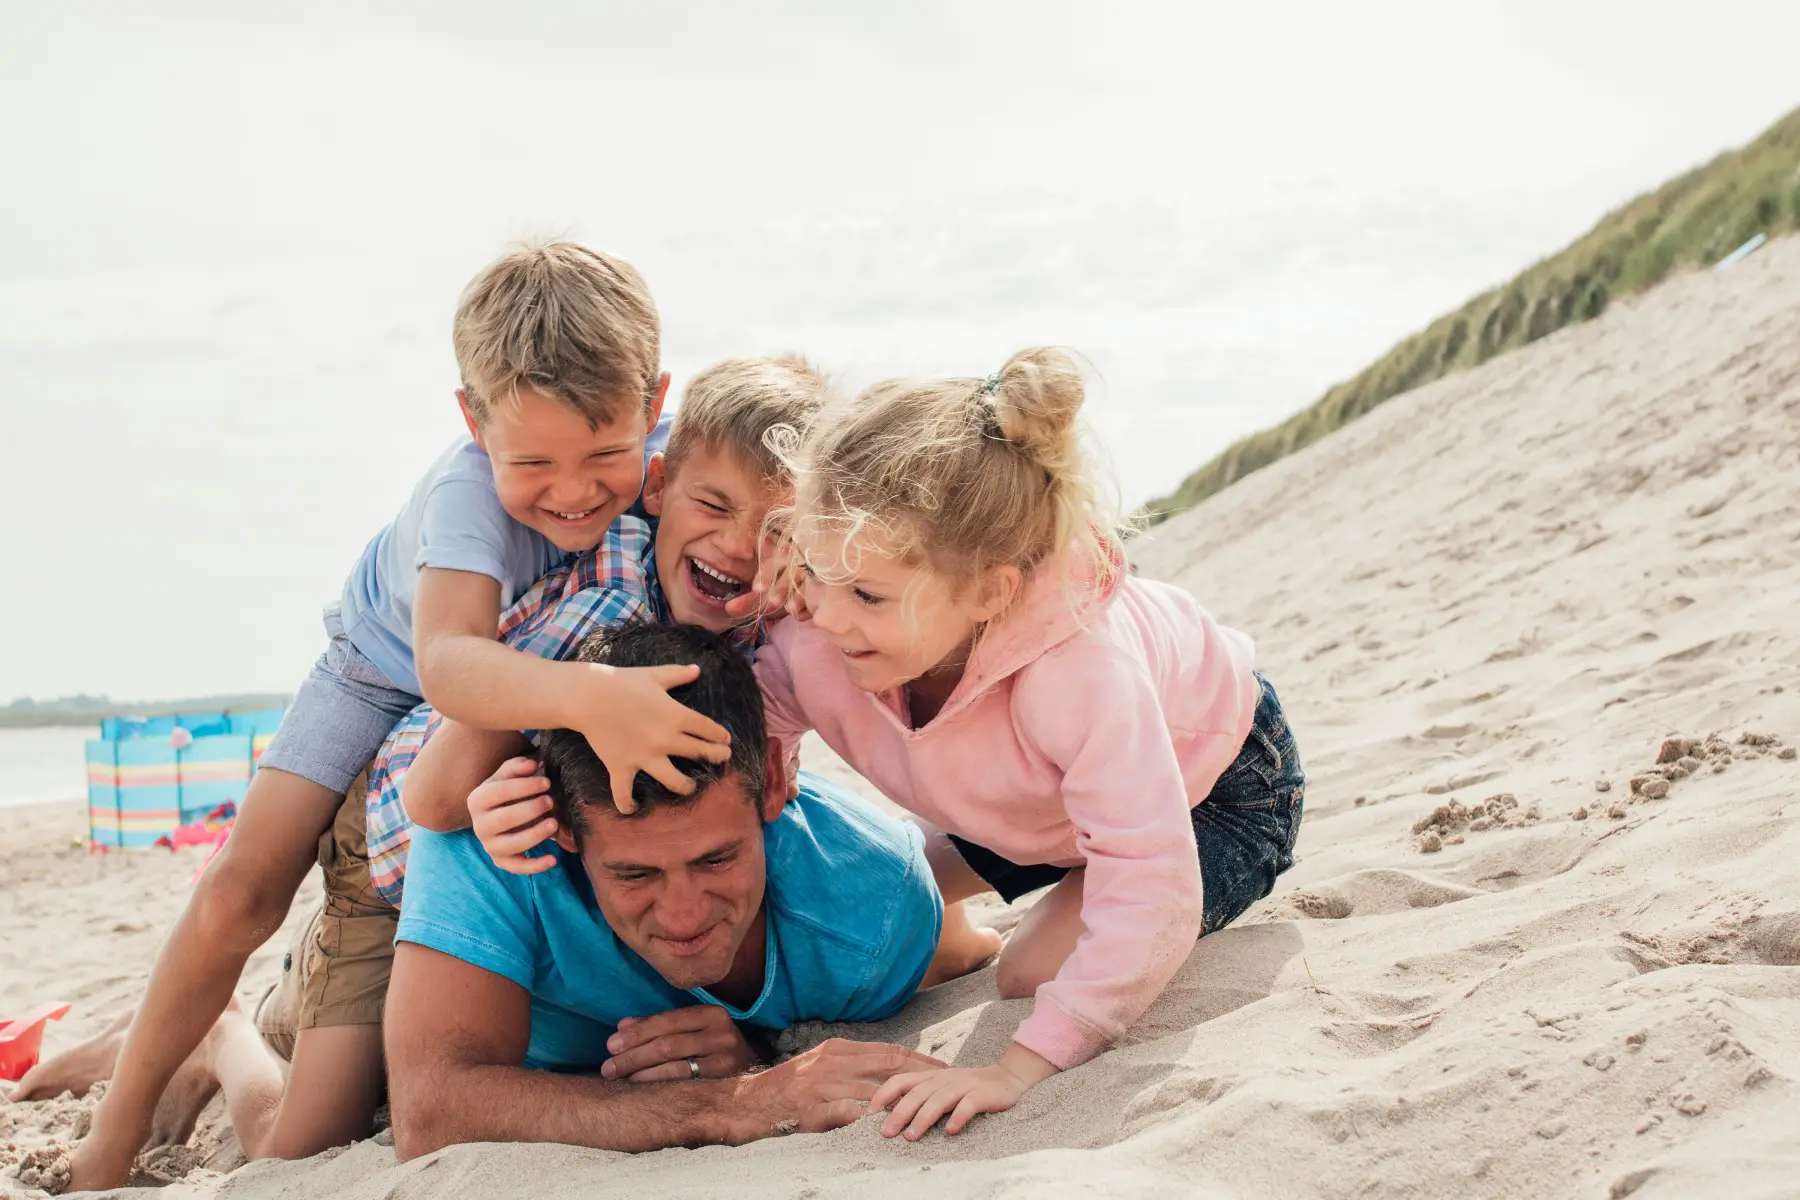 three children having fun at the beach with their father, pinning him down and tickling him